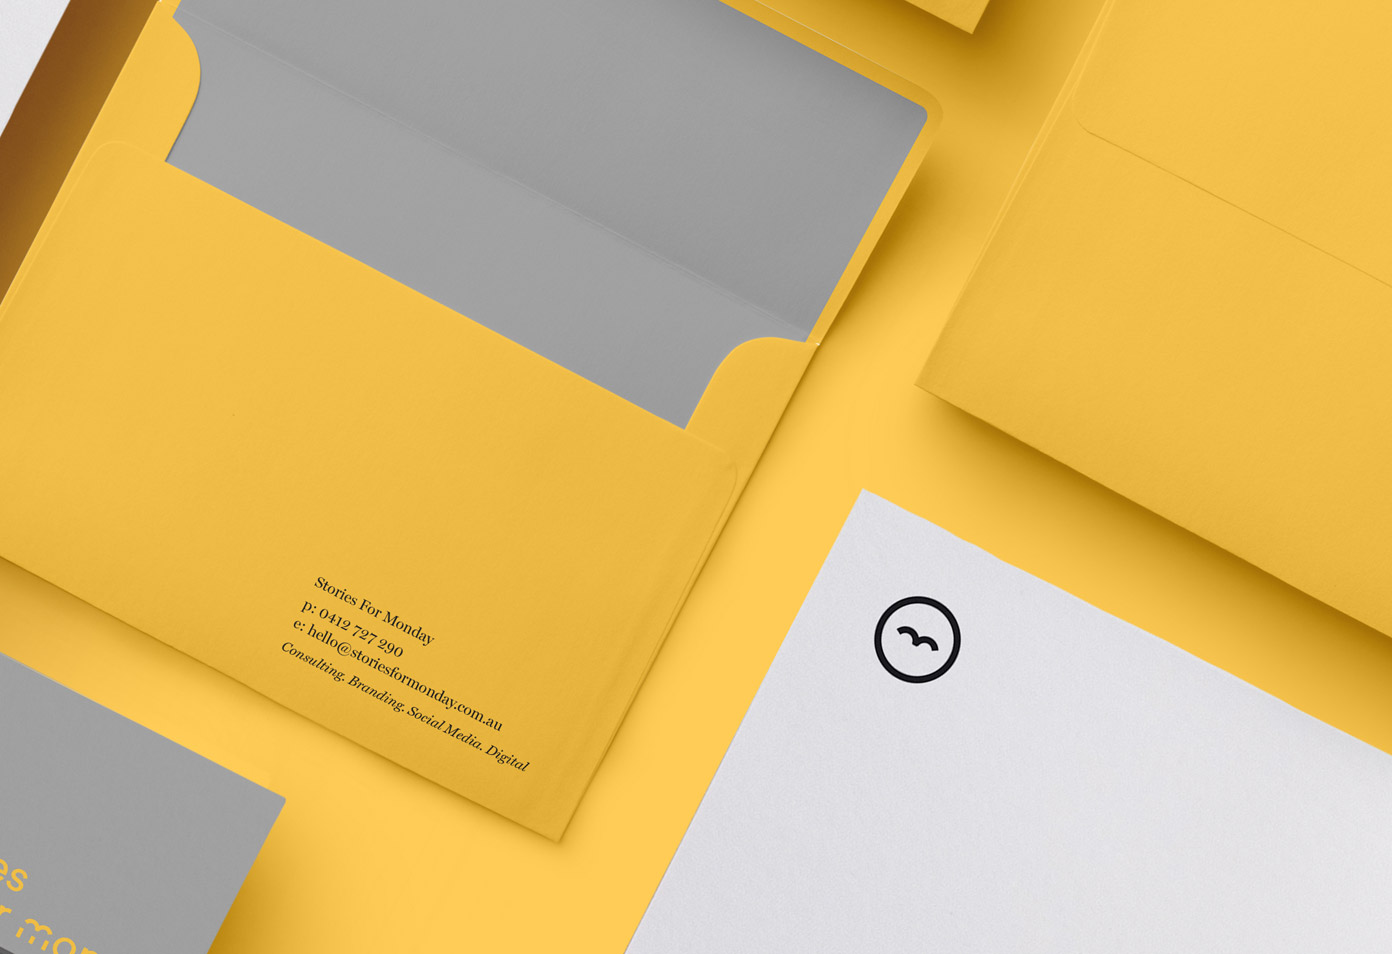 Stories For Monday branding by Madelyn Bilsborough